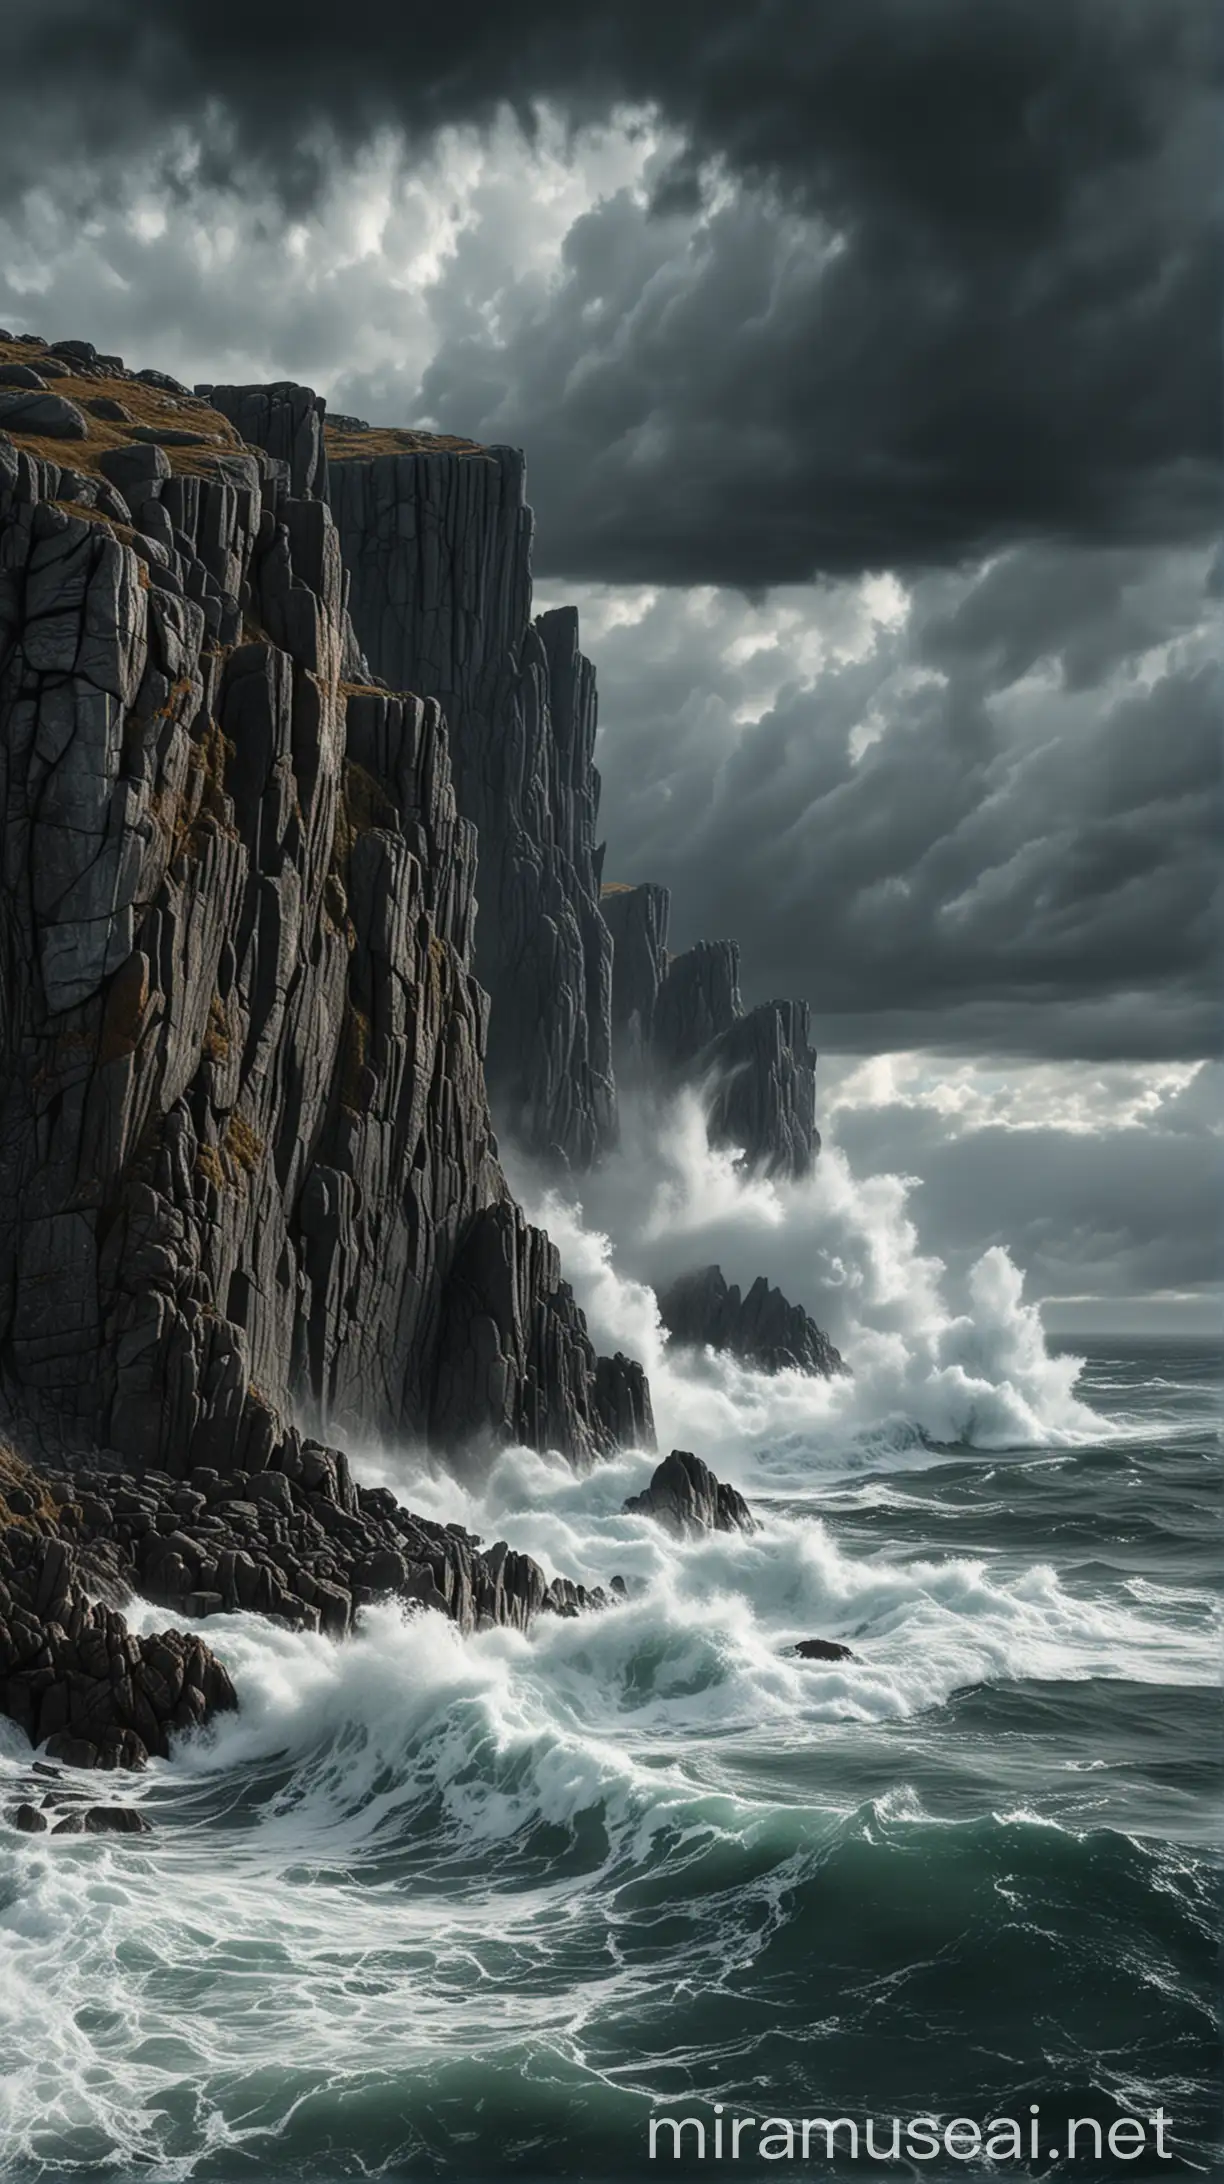 Dramatic Nordic Cliffs Stormy Seascape with Crashing Waves